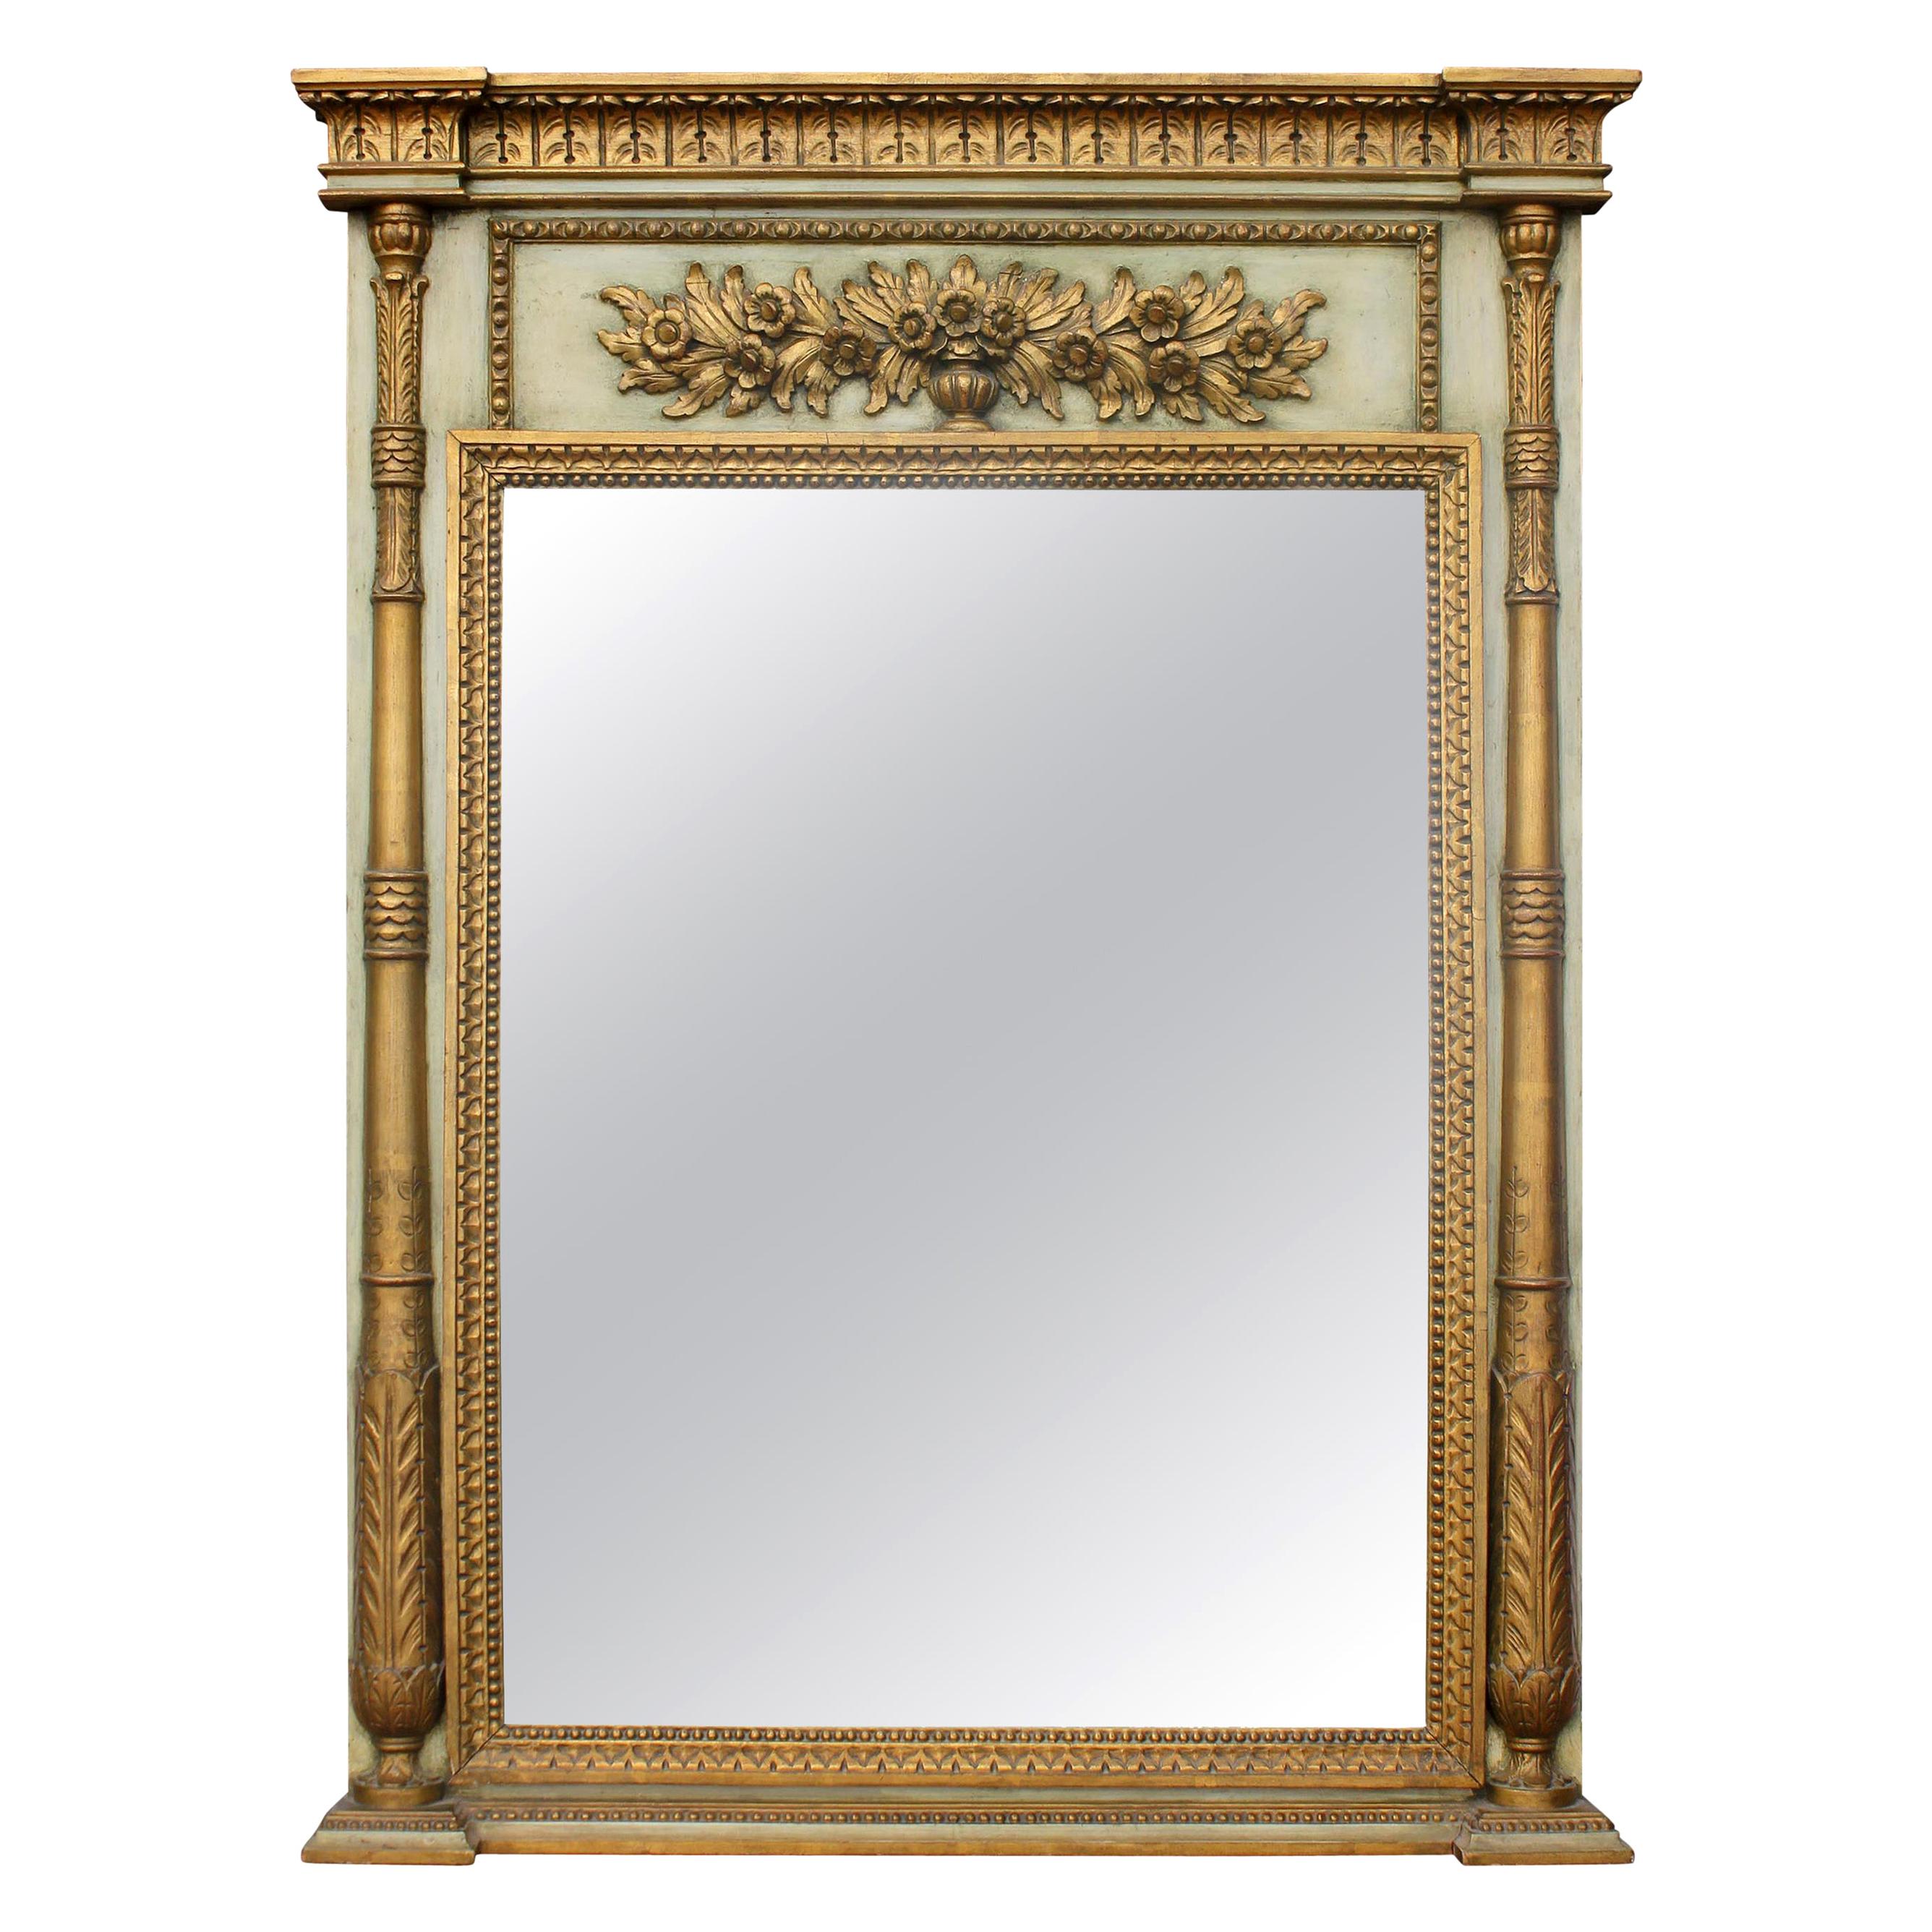 Neoclassical Style Trumeau Mirror